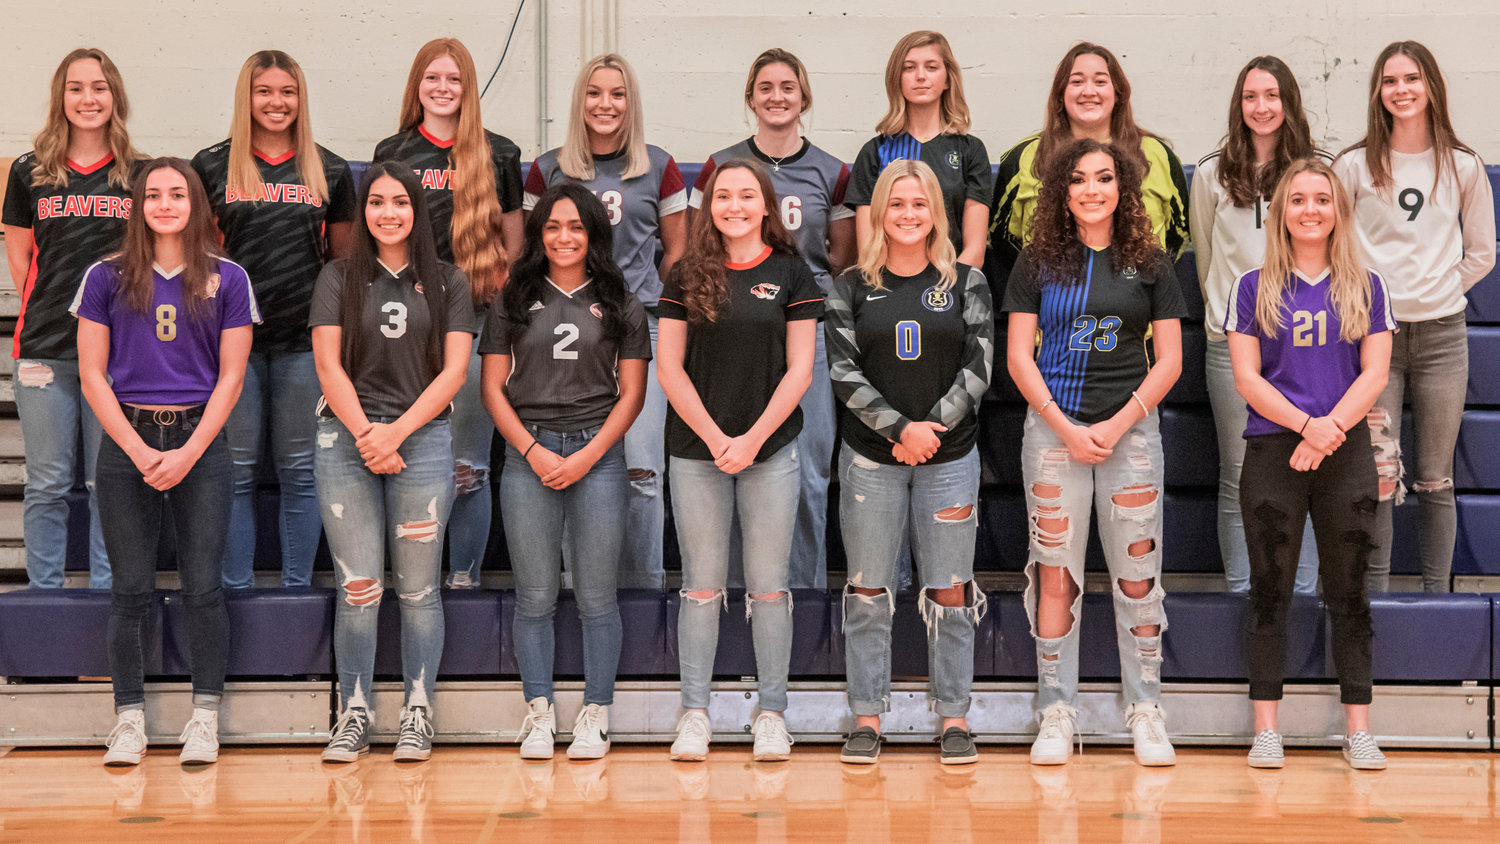 The Chronicle's 2021-22 All-Area Girls Soccer Team poses for a photo in the Centralia College gymnasium on Nov. 29.